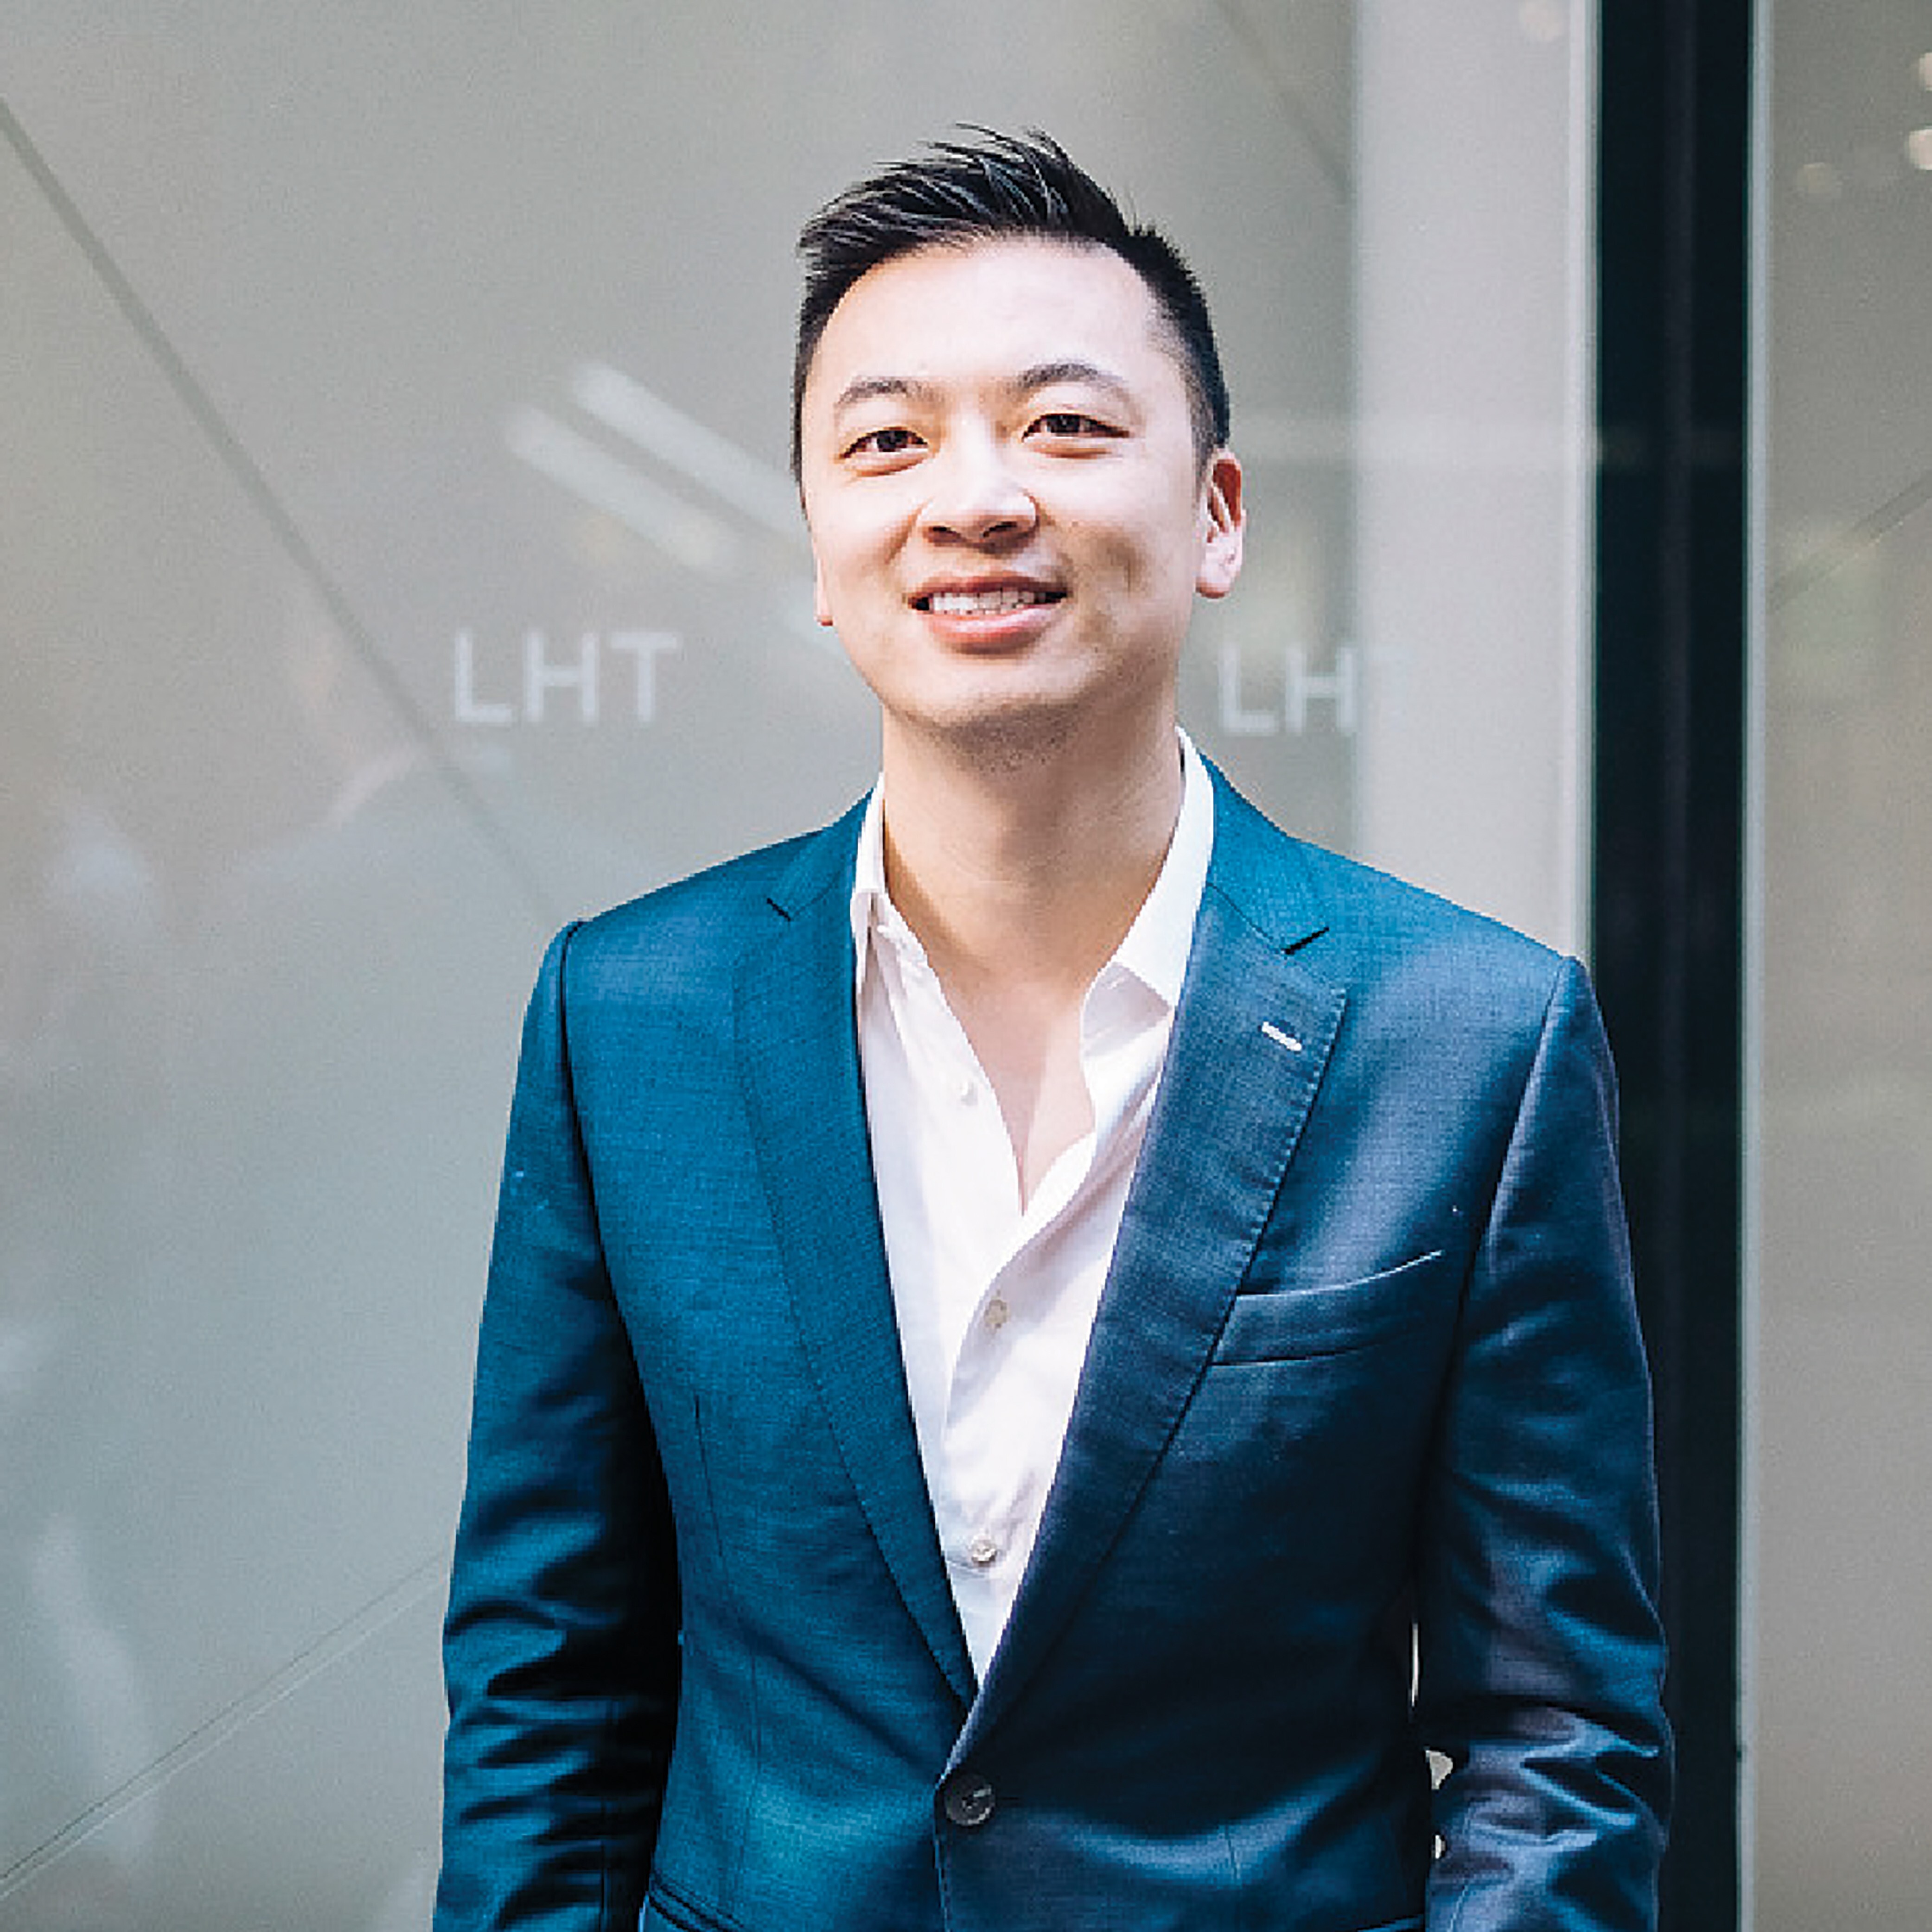 Danny Yeung, founder of CircleDNA, cut out beef from his diet after learning he has an increased risk for colon cancer due to a gene mutation. Photo: Handout